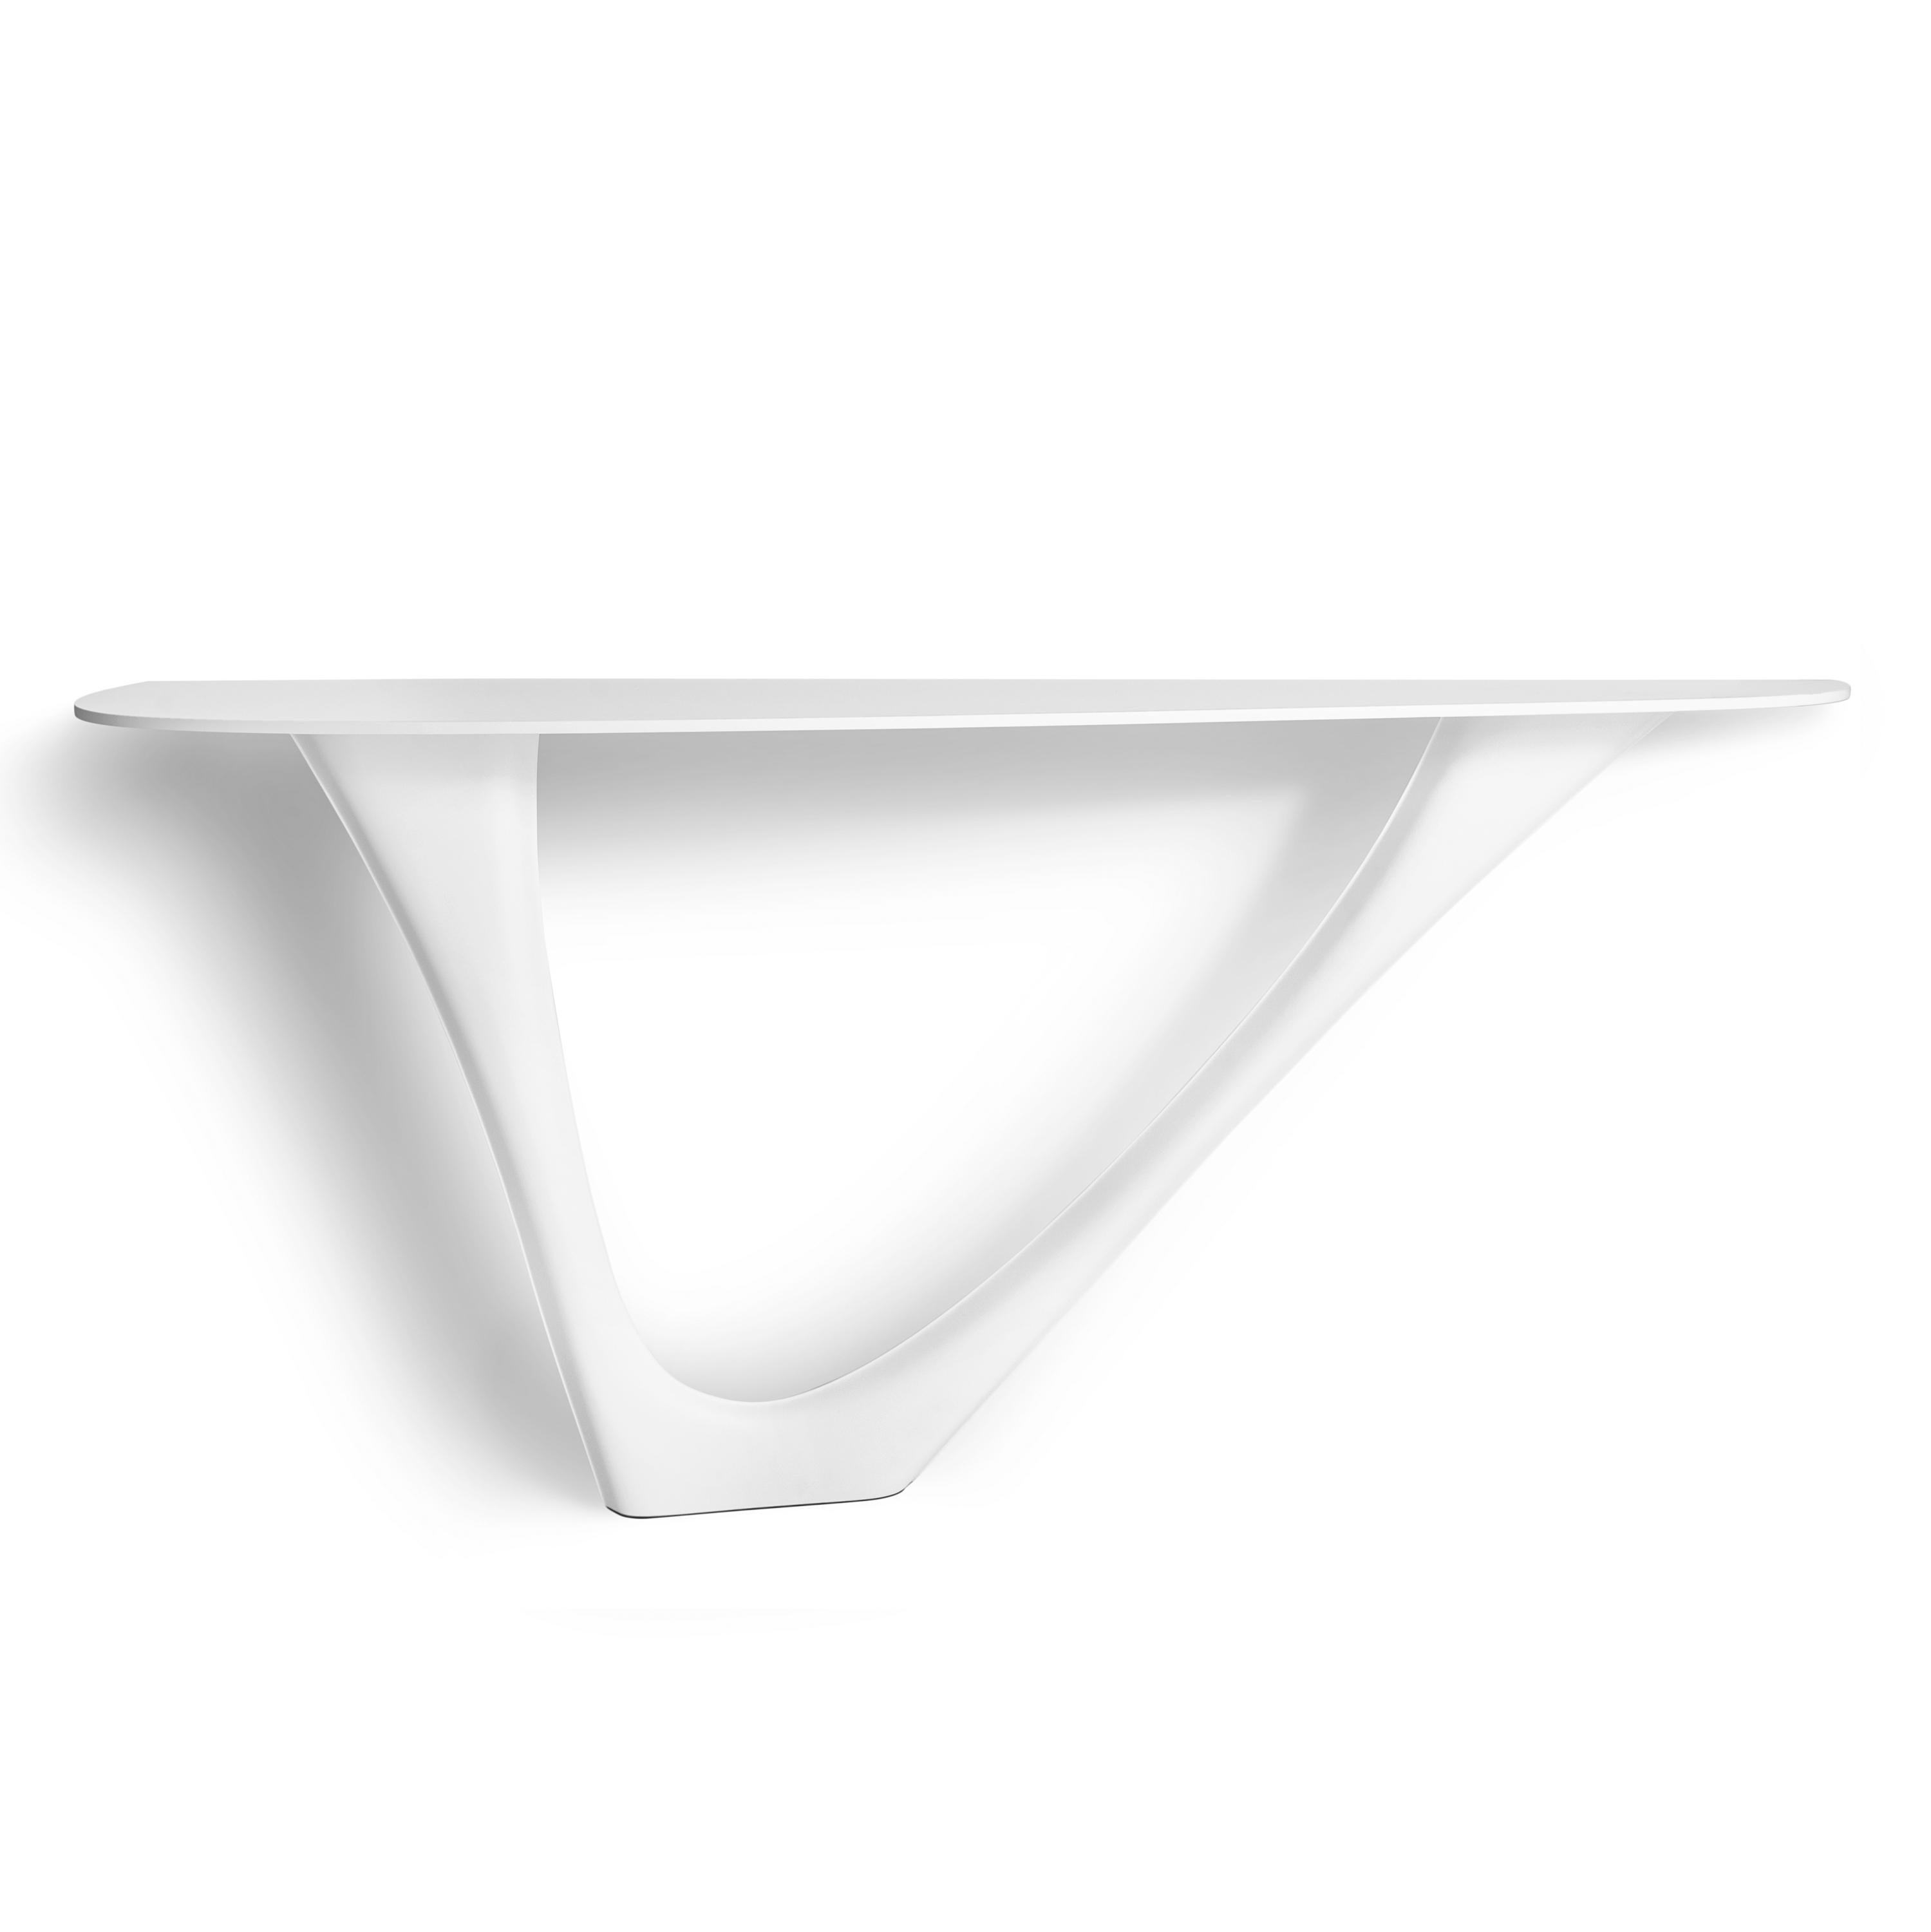 White Matt G-Console steel base with steel top Mono by Zieta
Dimensions: D 43 x W 159 x H 75 cm 
Material: Carbon steel. 
Also available in different colors and dimensions.

G-Console is another bionic object in our collection. Created for smaller